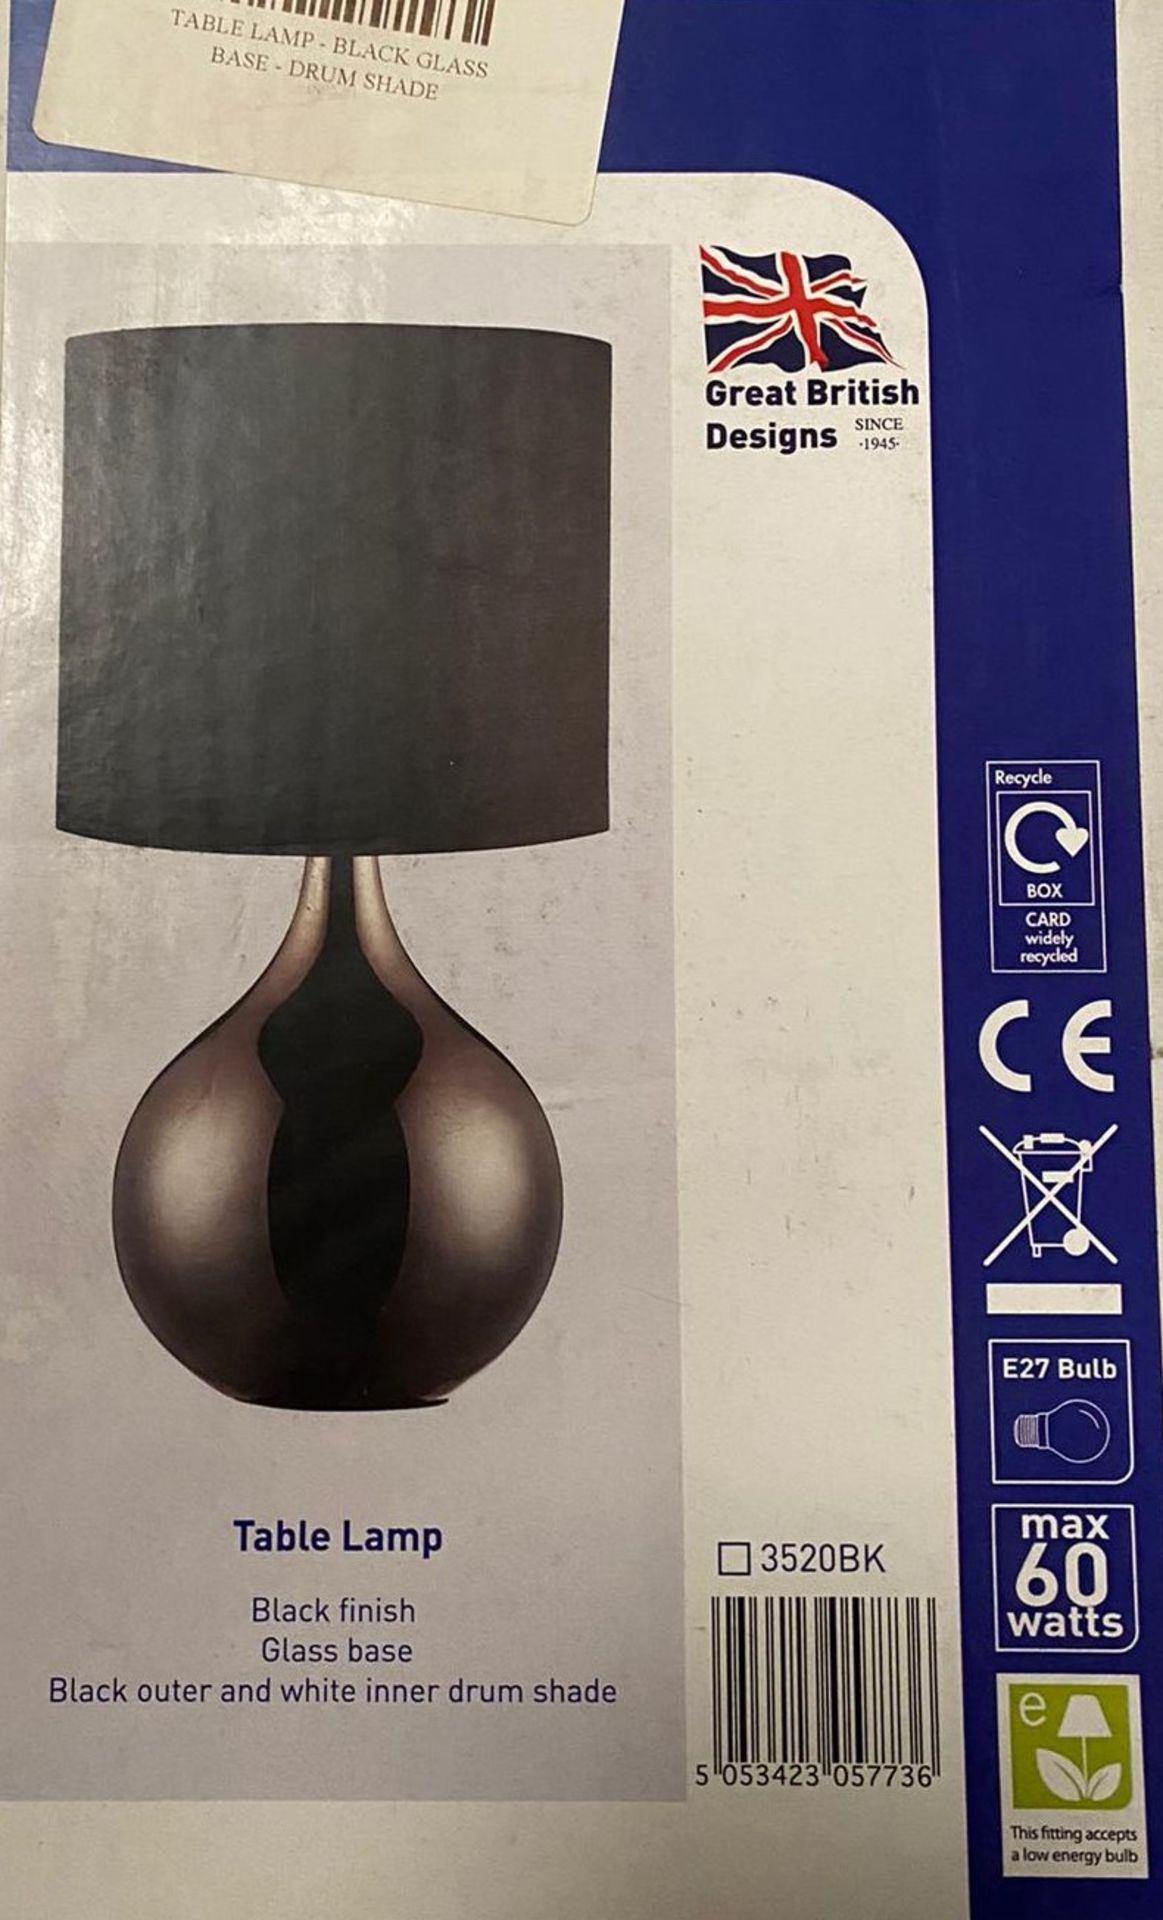 1 x Searchlight Table Lamp in black with a glass base - Ref: 3520BK - New and Boxed - RRP: £80